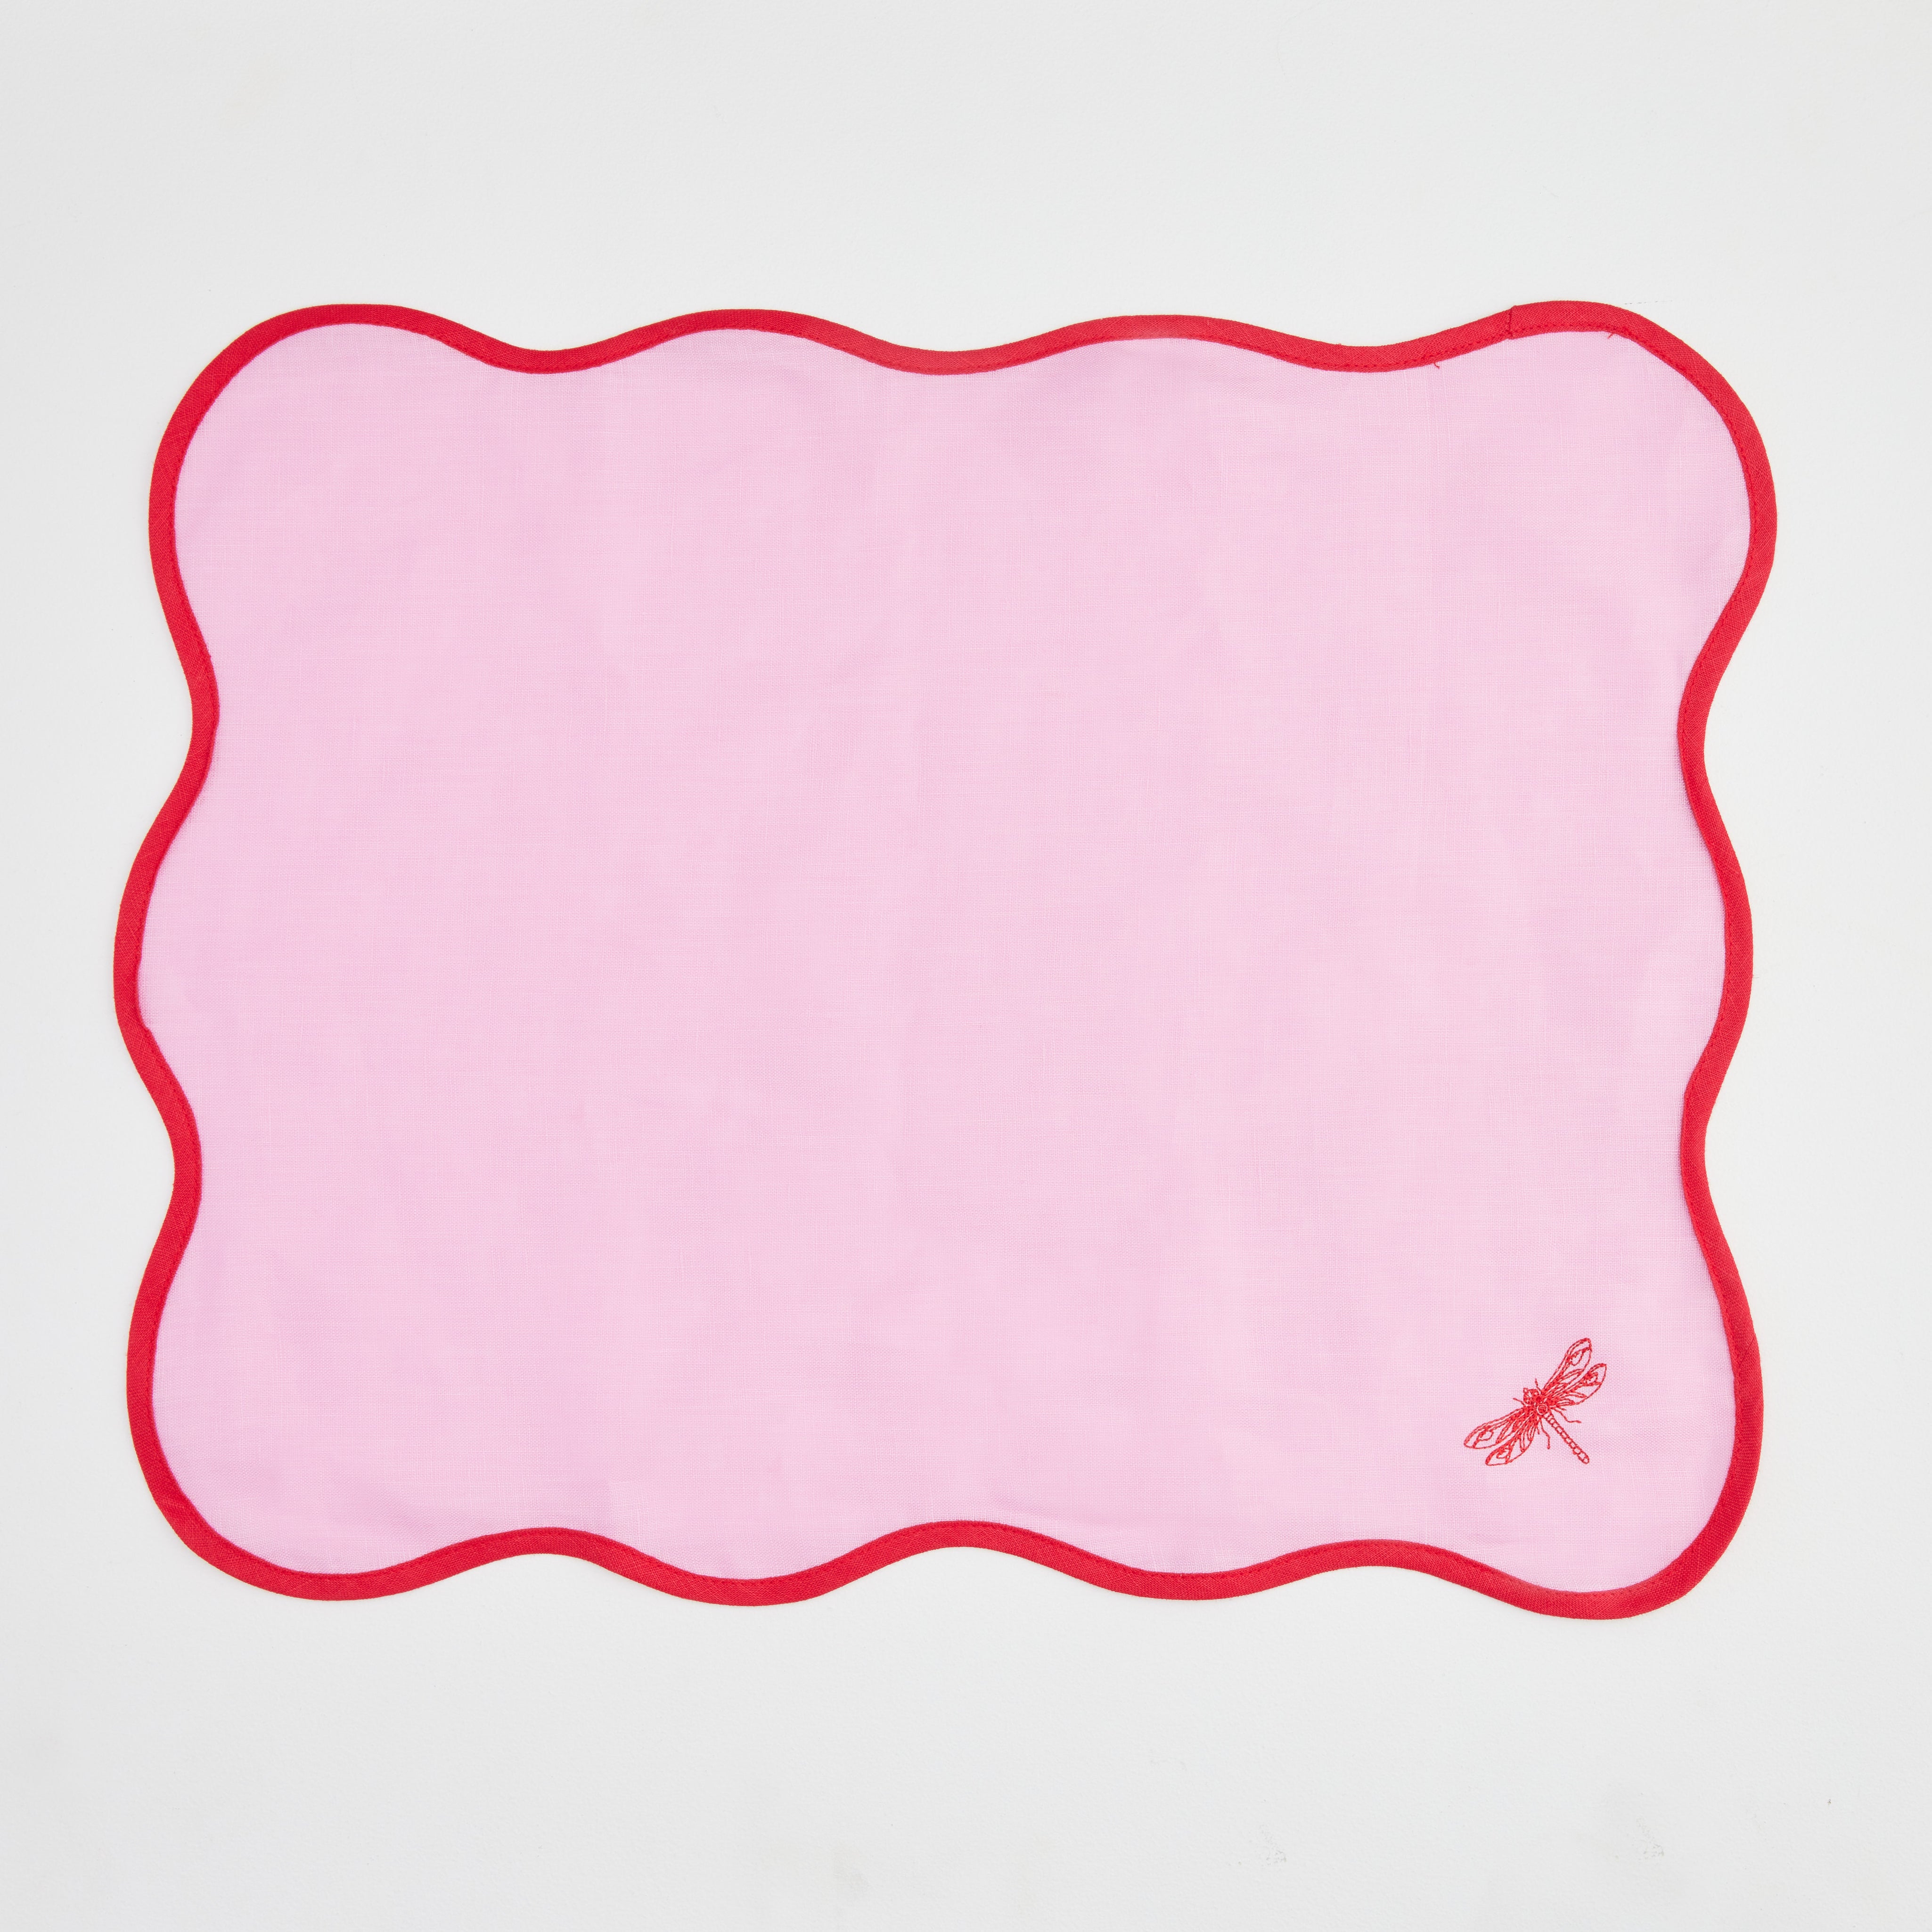 large-size-towel-placemat-styled_products25526.jpg